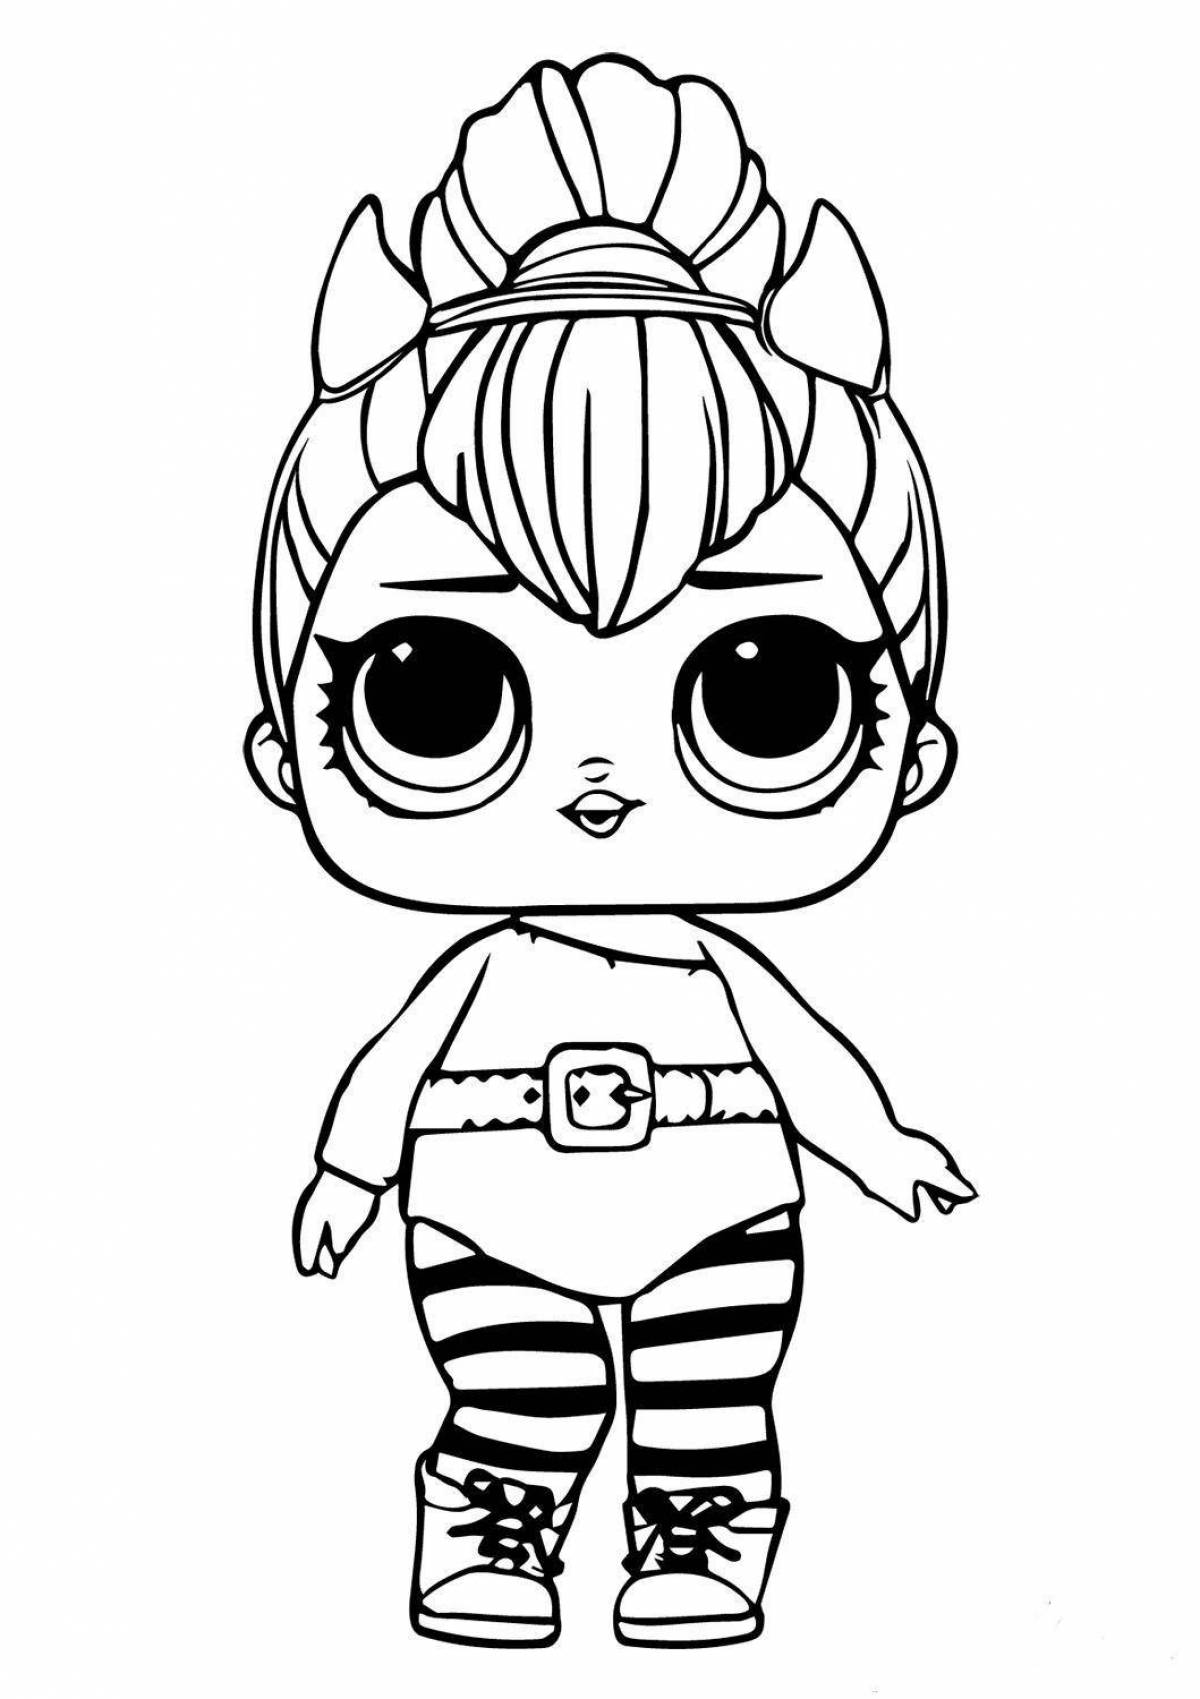 Gorgeous lol dolls coloring pages